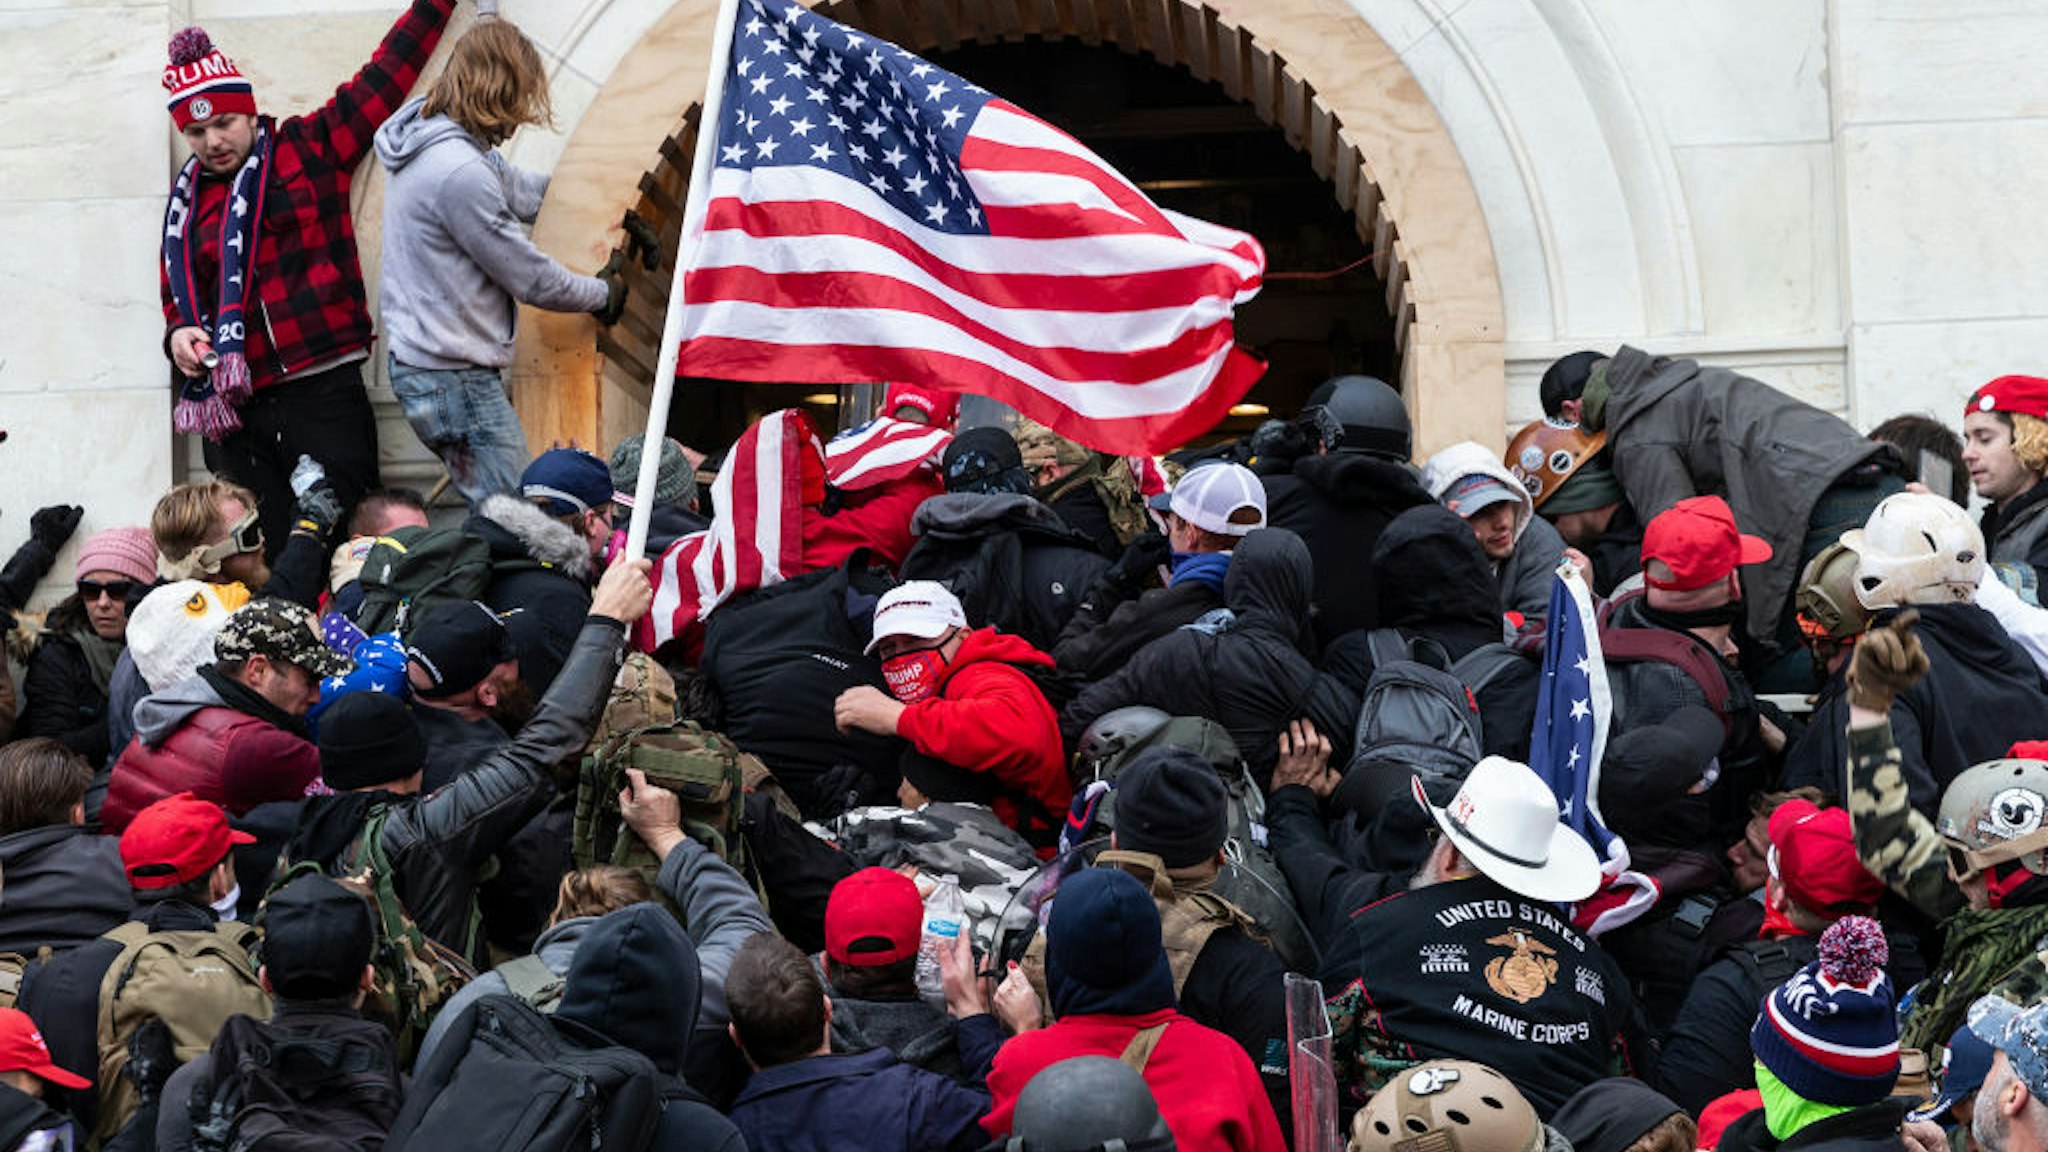 Rioters clash with police trying to enter Capitol building